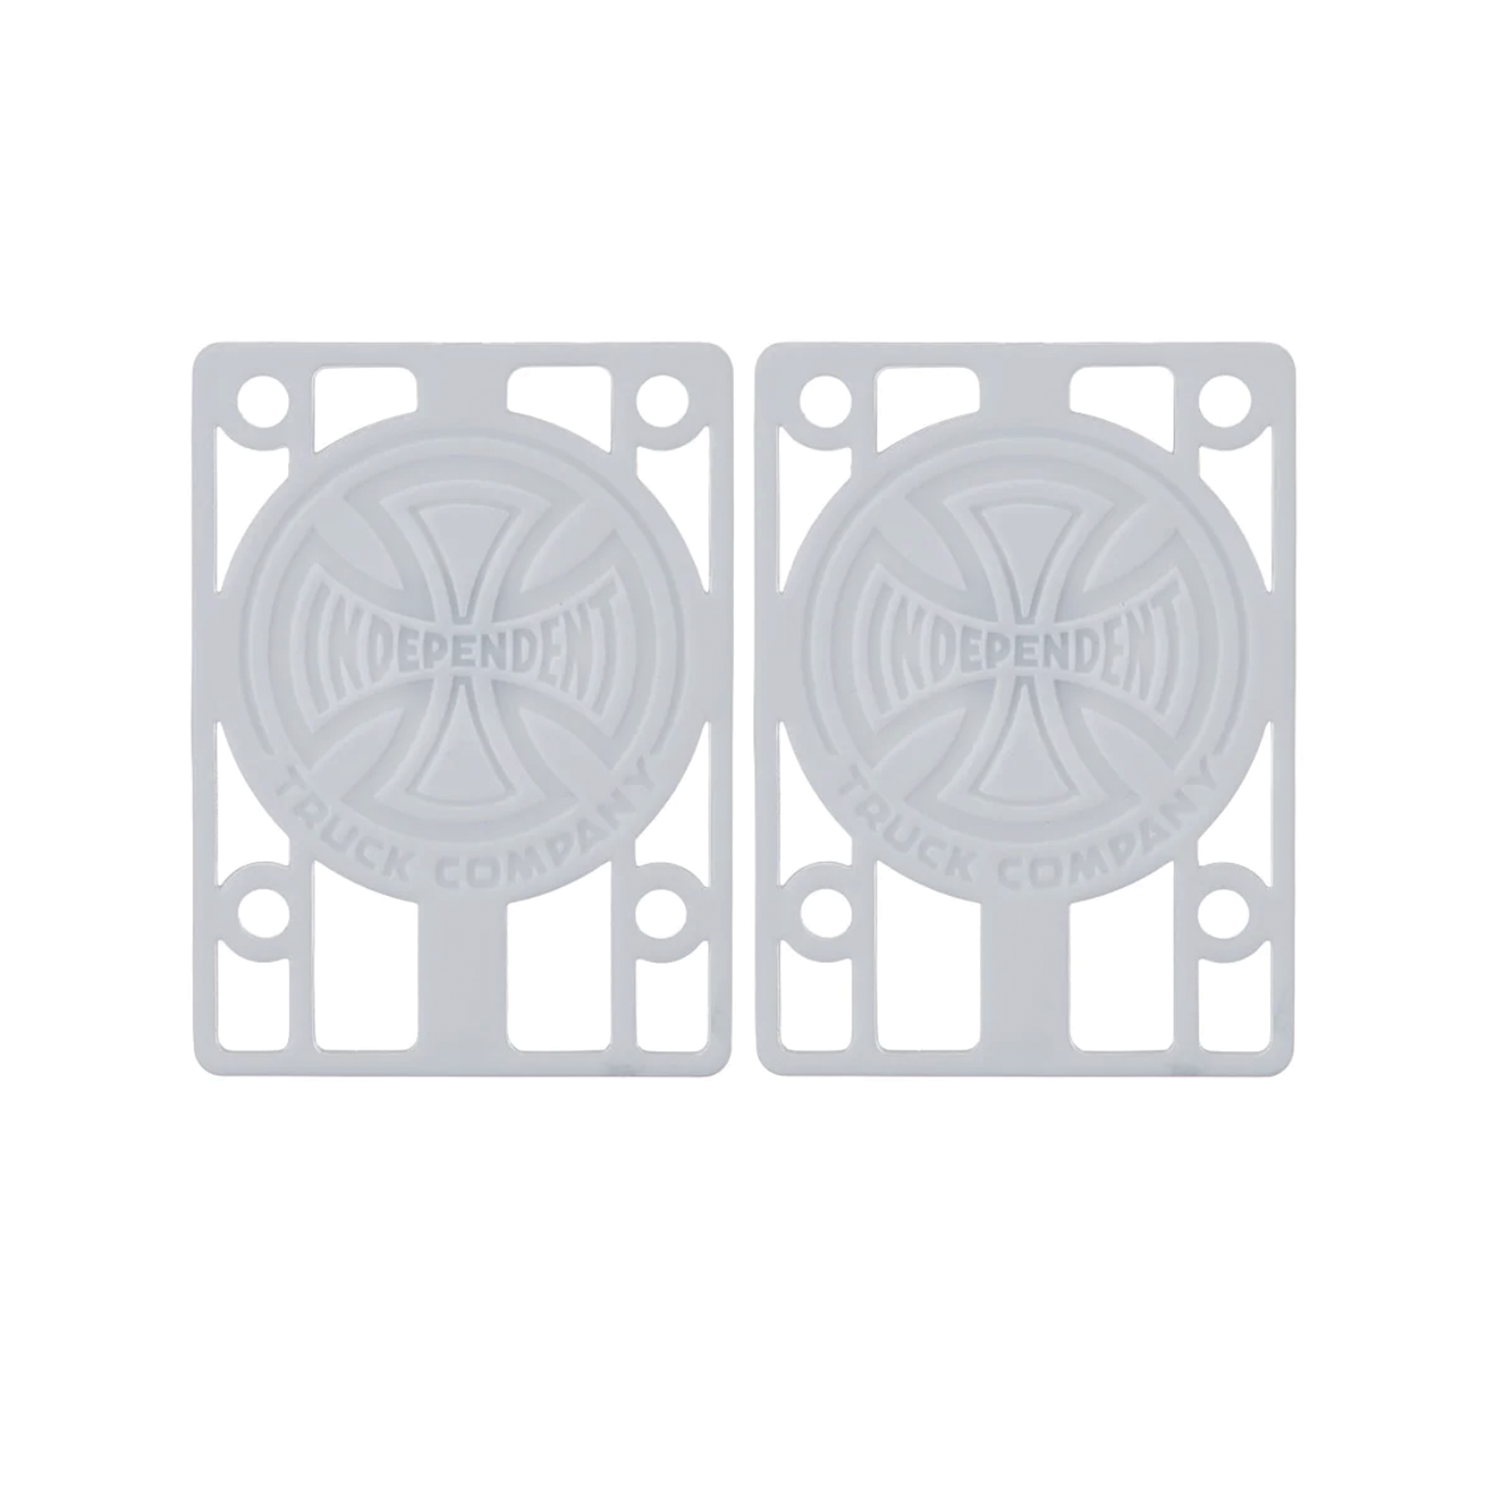 INDEPENDENT TRUCK CO. RISER PADS 1/8"